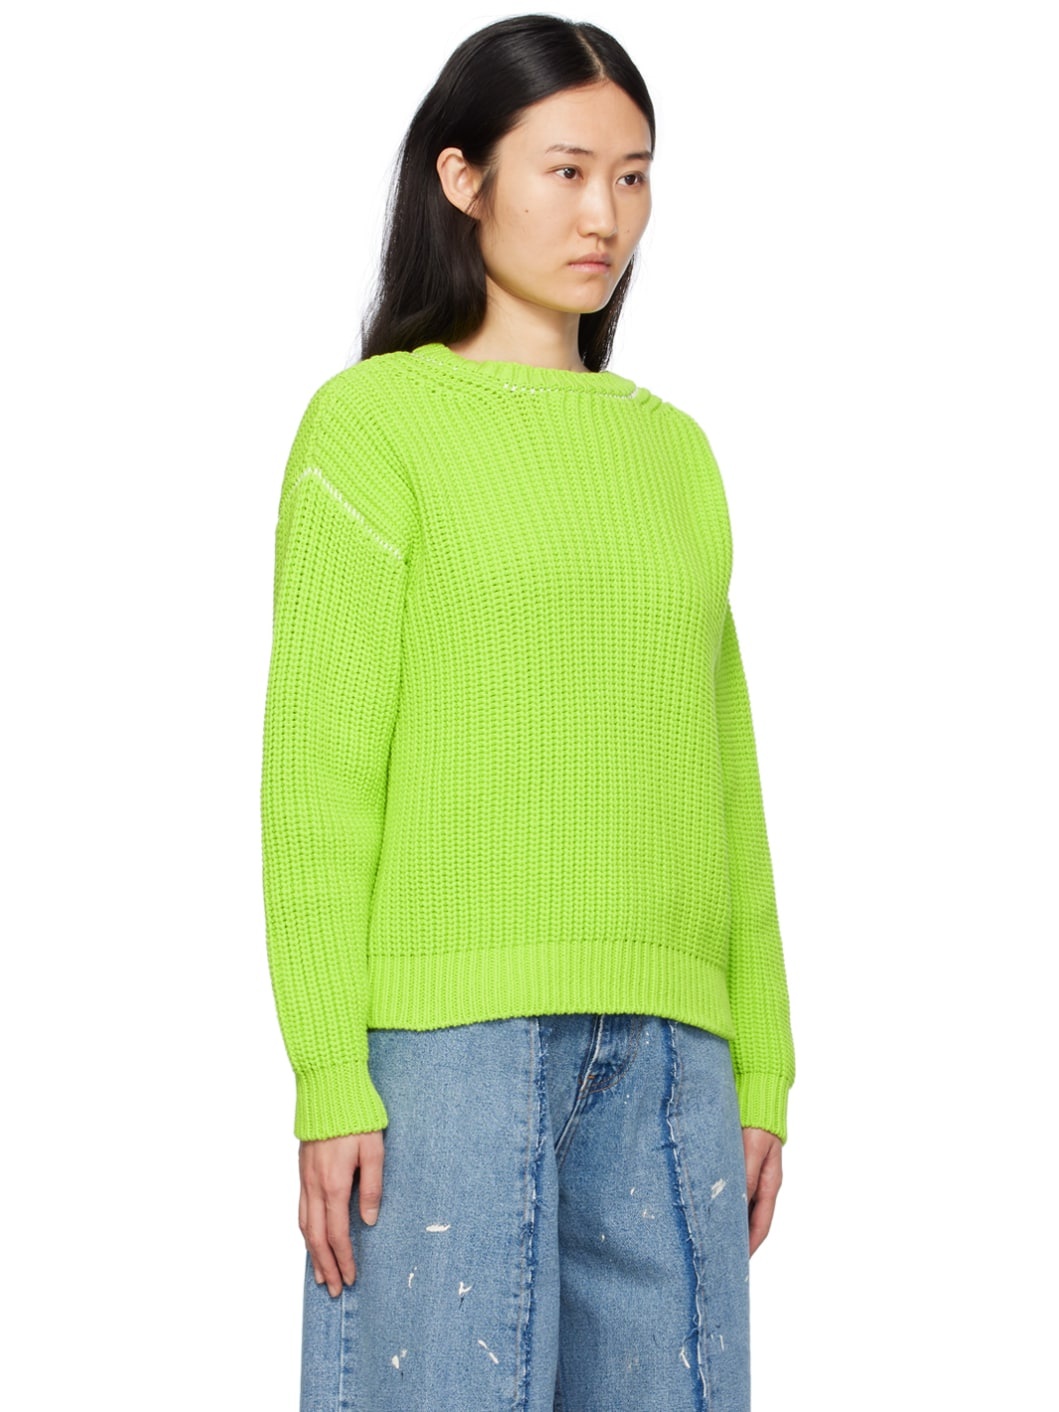 Green Airy Sweater - 2